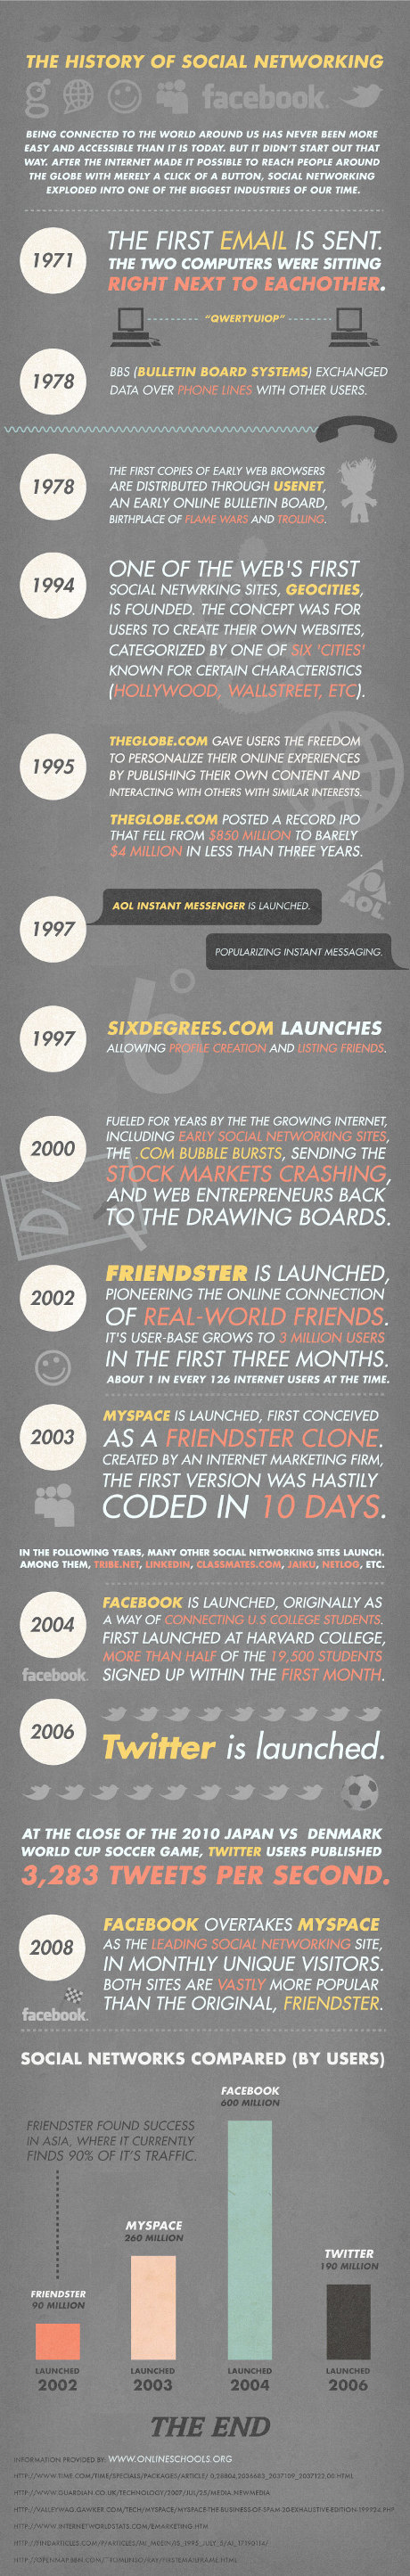 The History of Social Networking